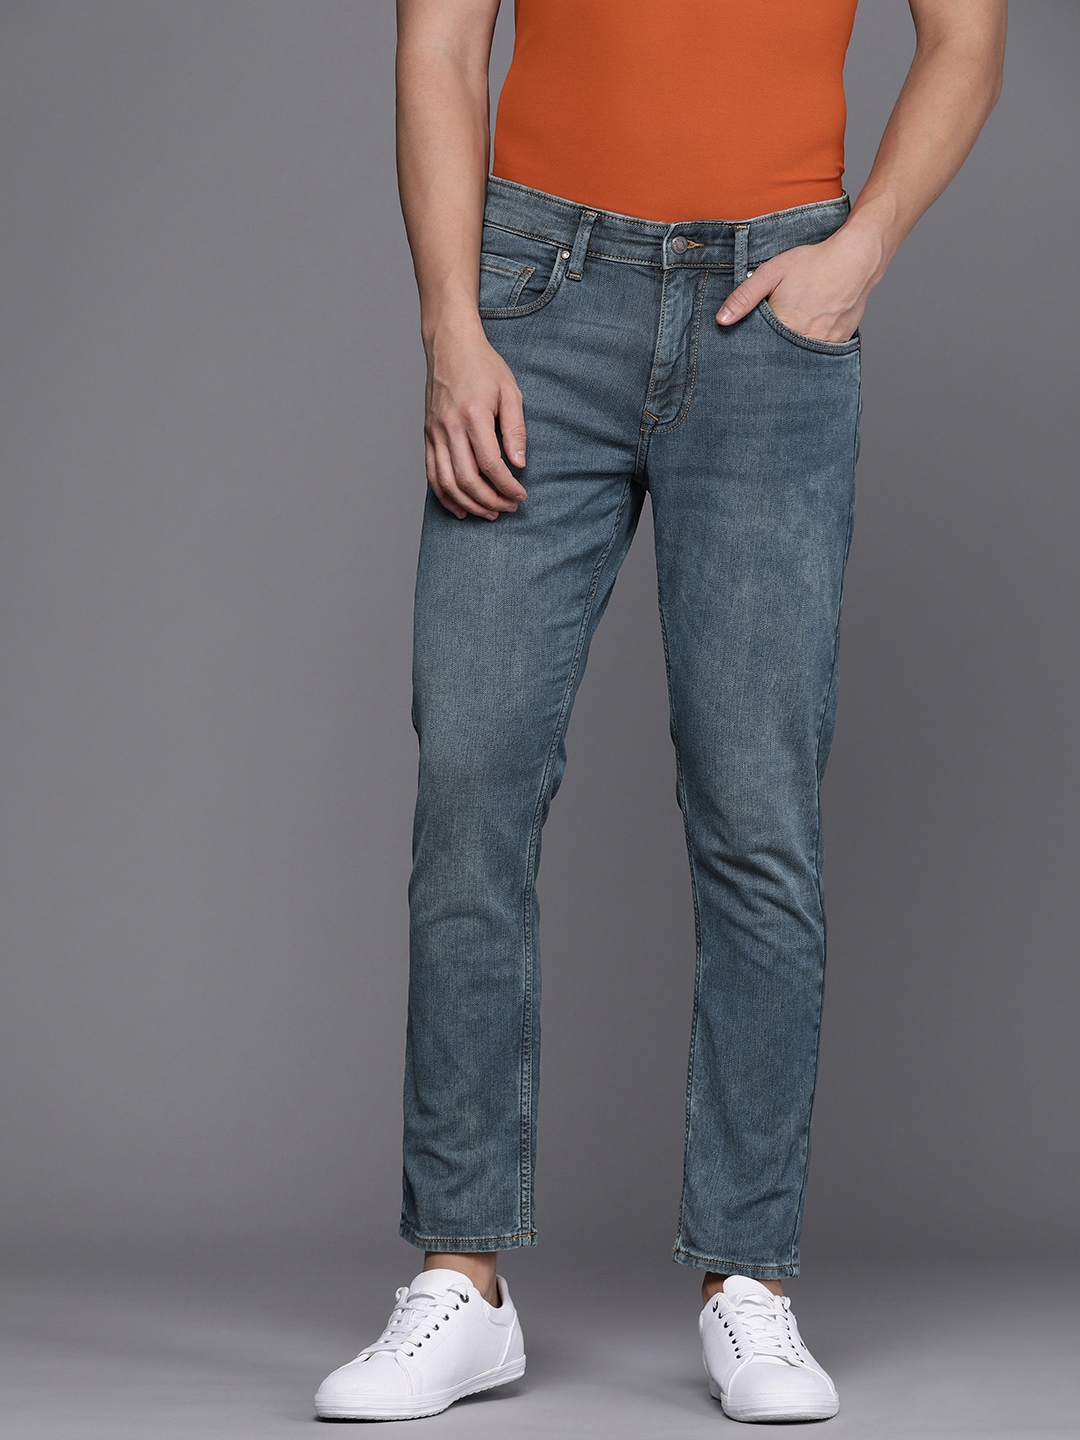 Louis Philippe Jeans Men's Tapered Fit Jeans